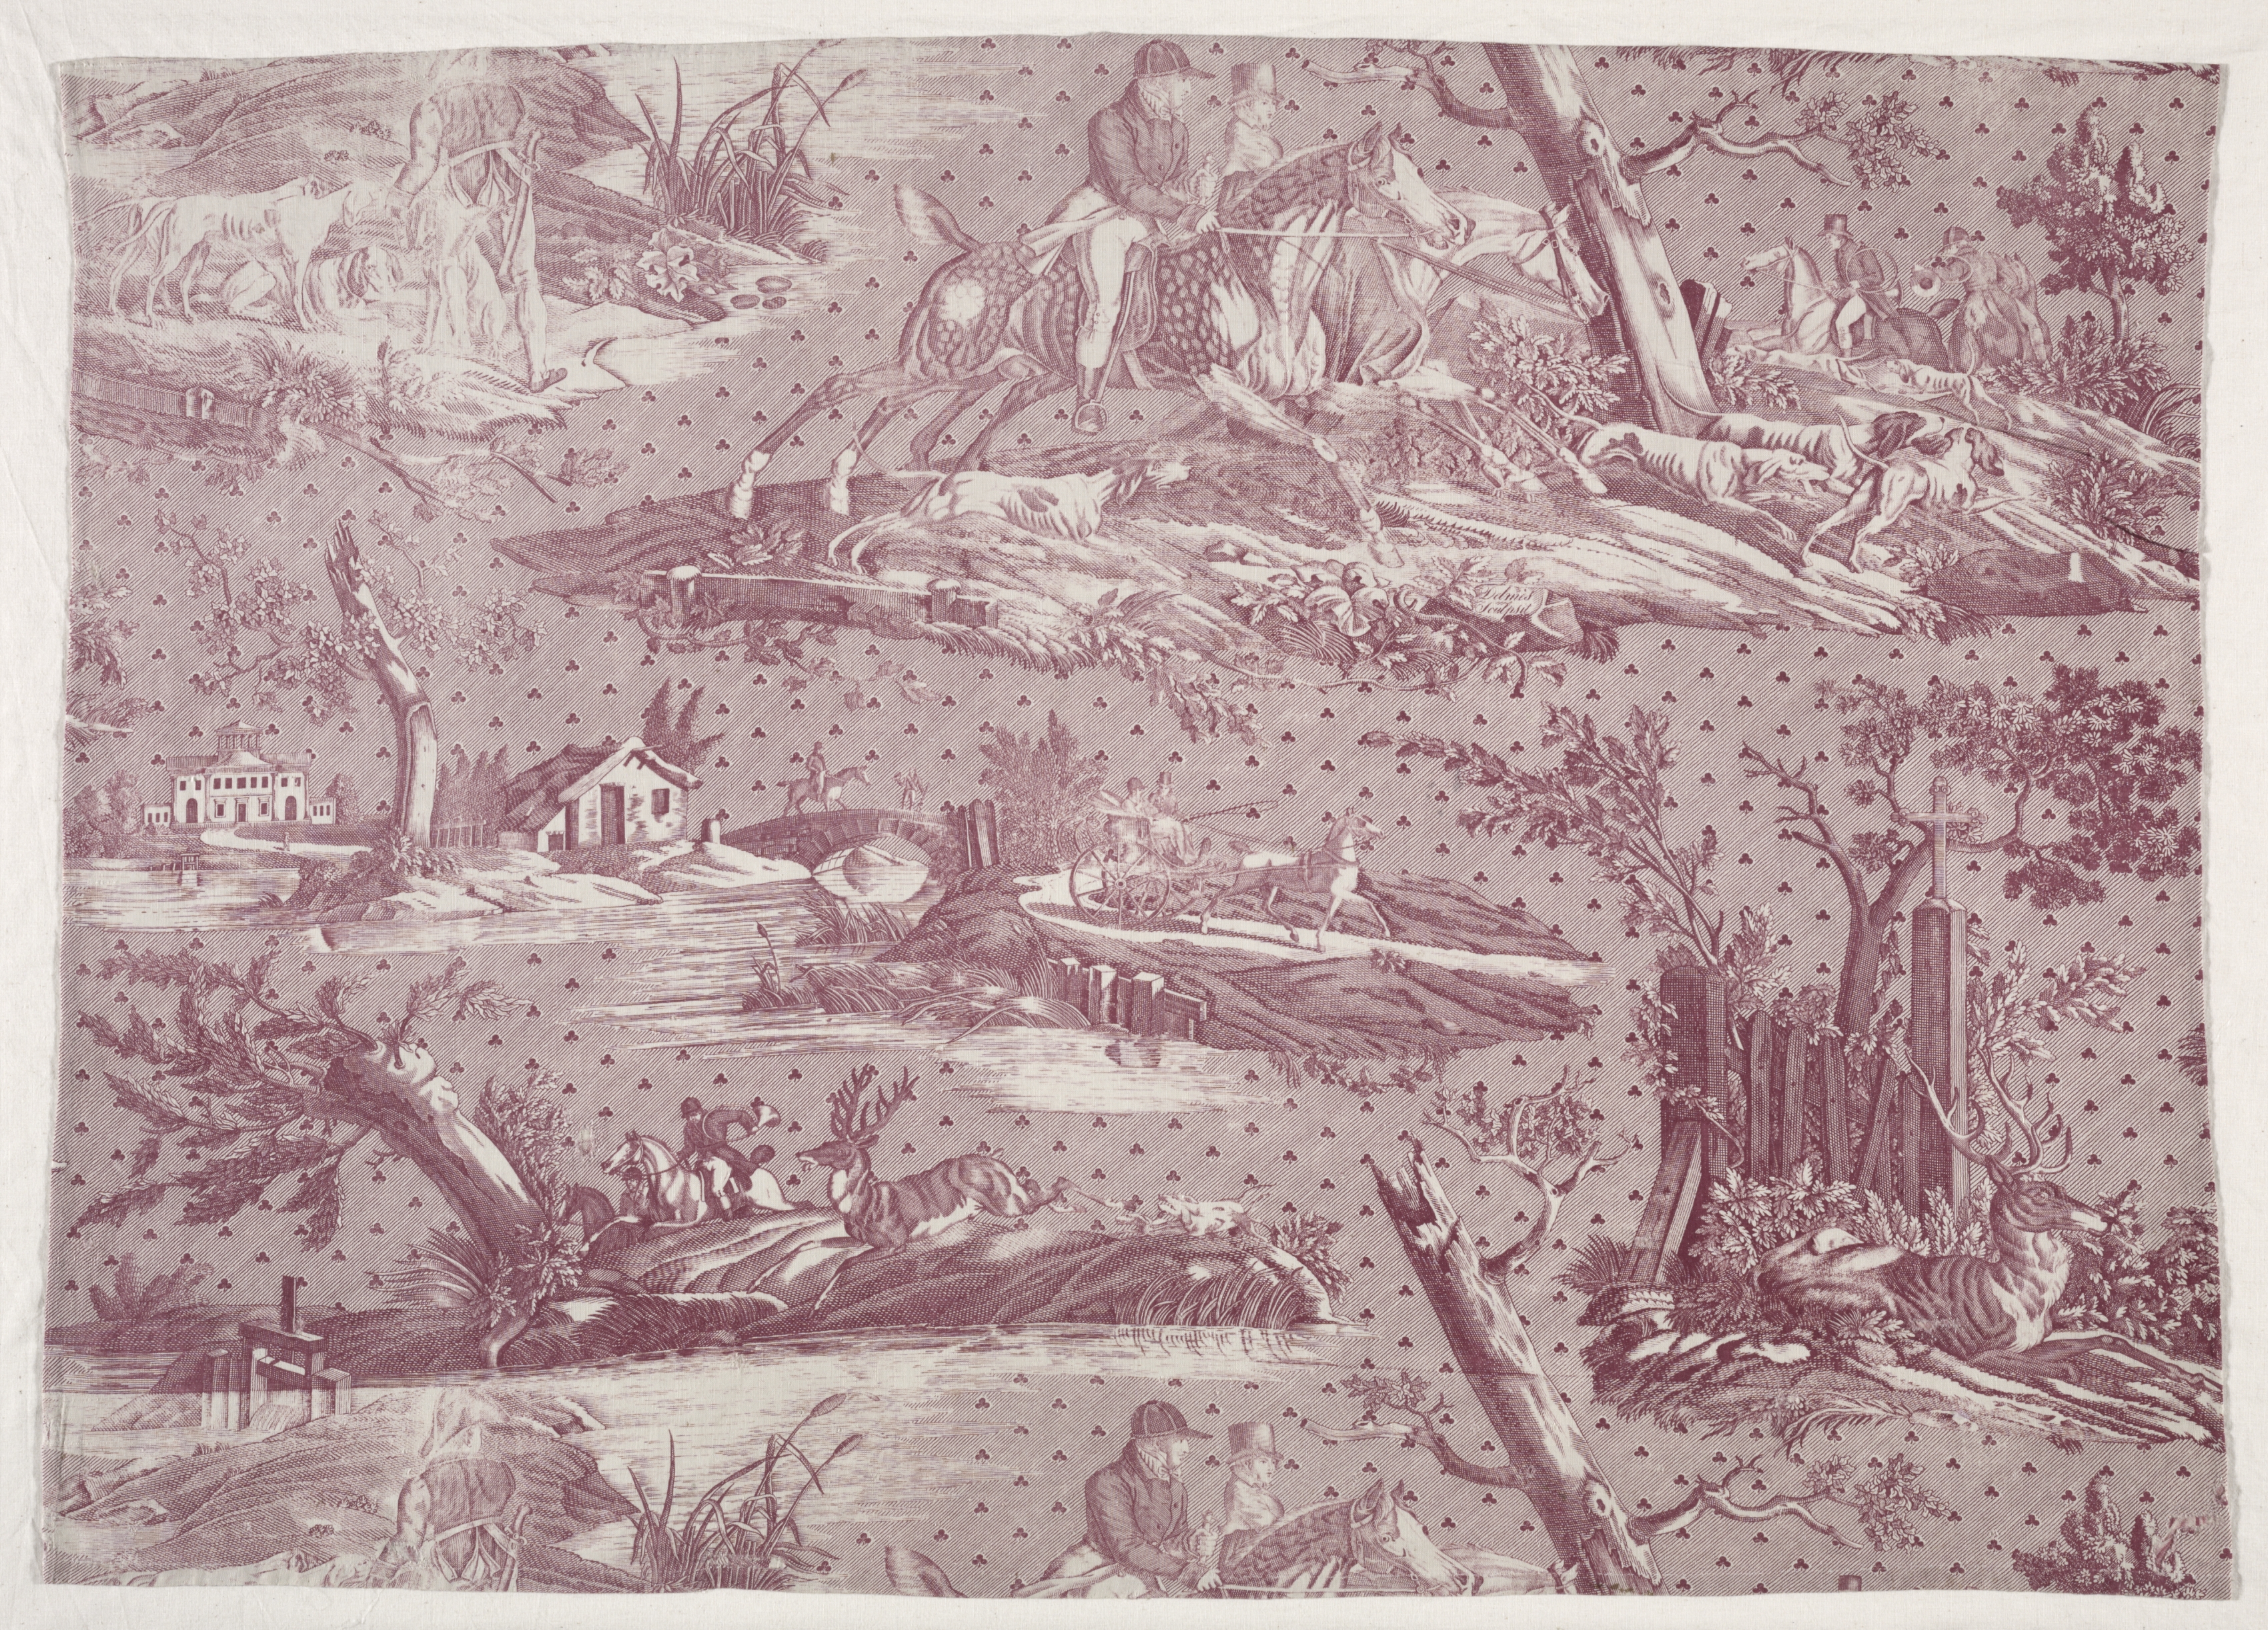 Fragment of Copperplate Printed Cotton with Hunting Scene Design